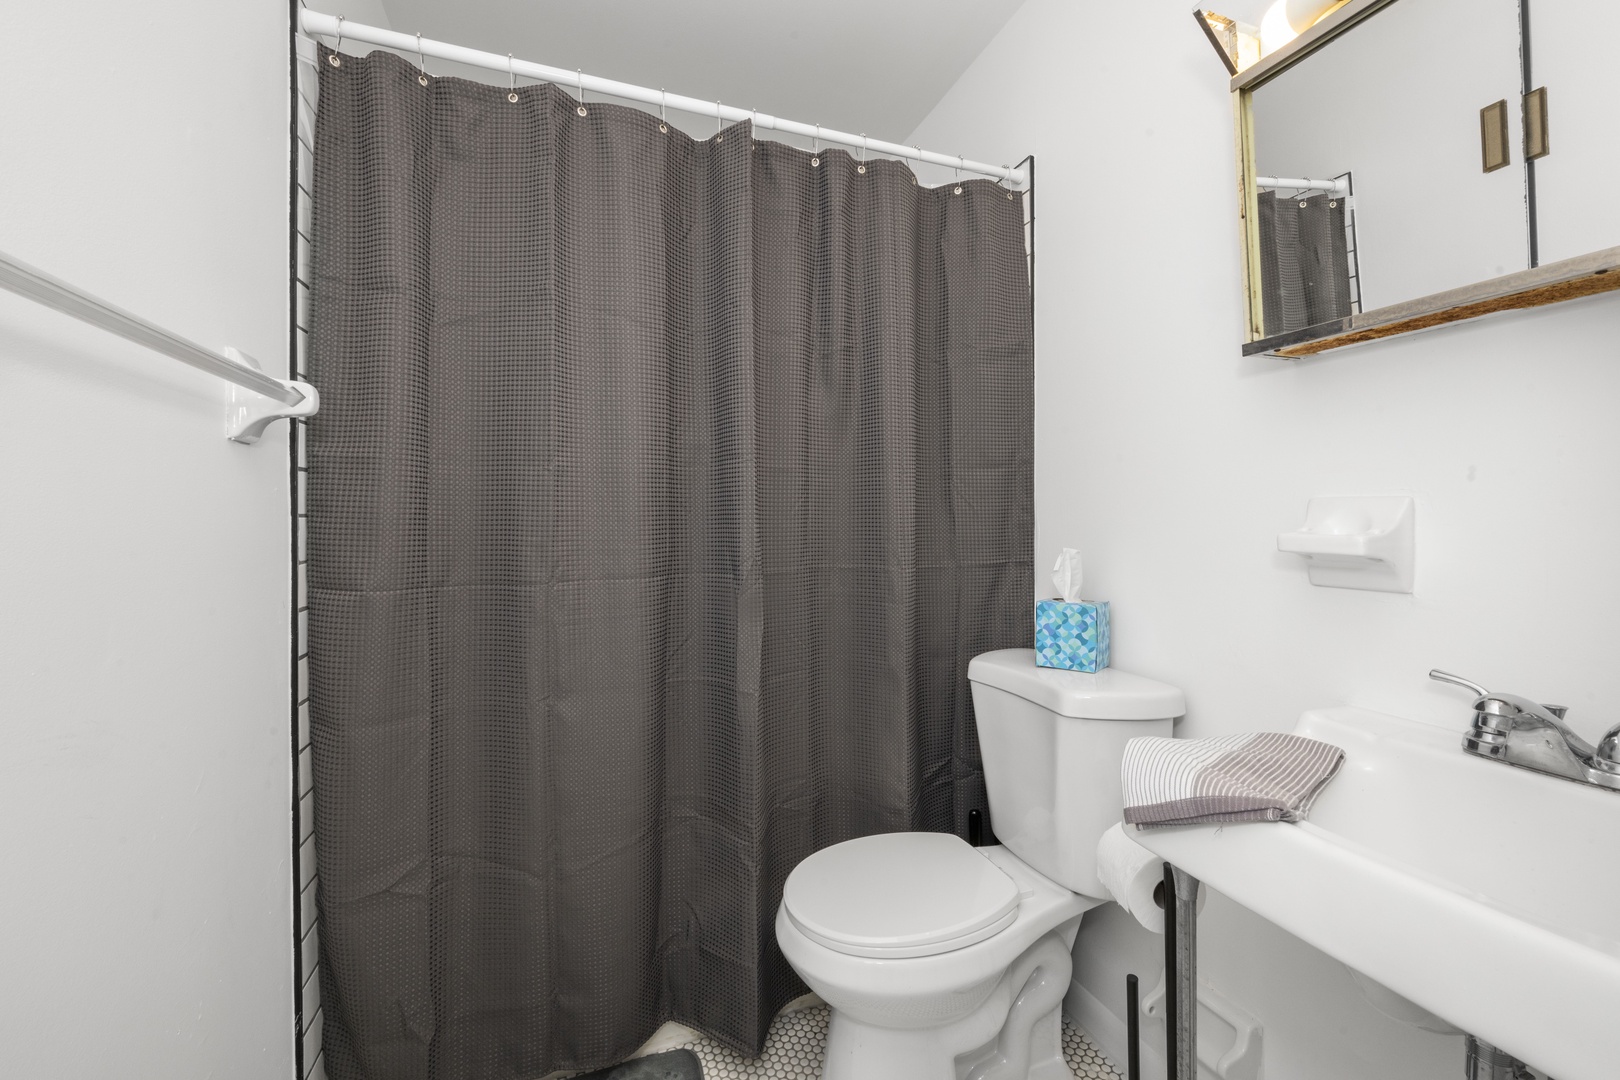 Suite 4: The sophisticated full bath features a single vanity and shower/tub combo